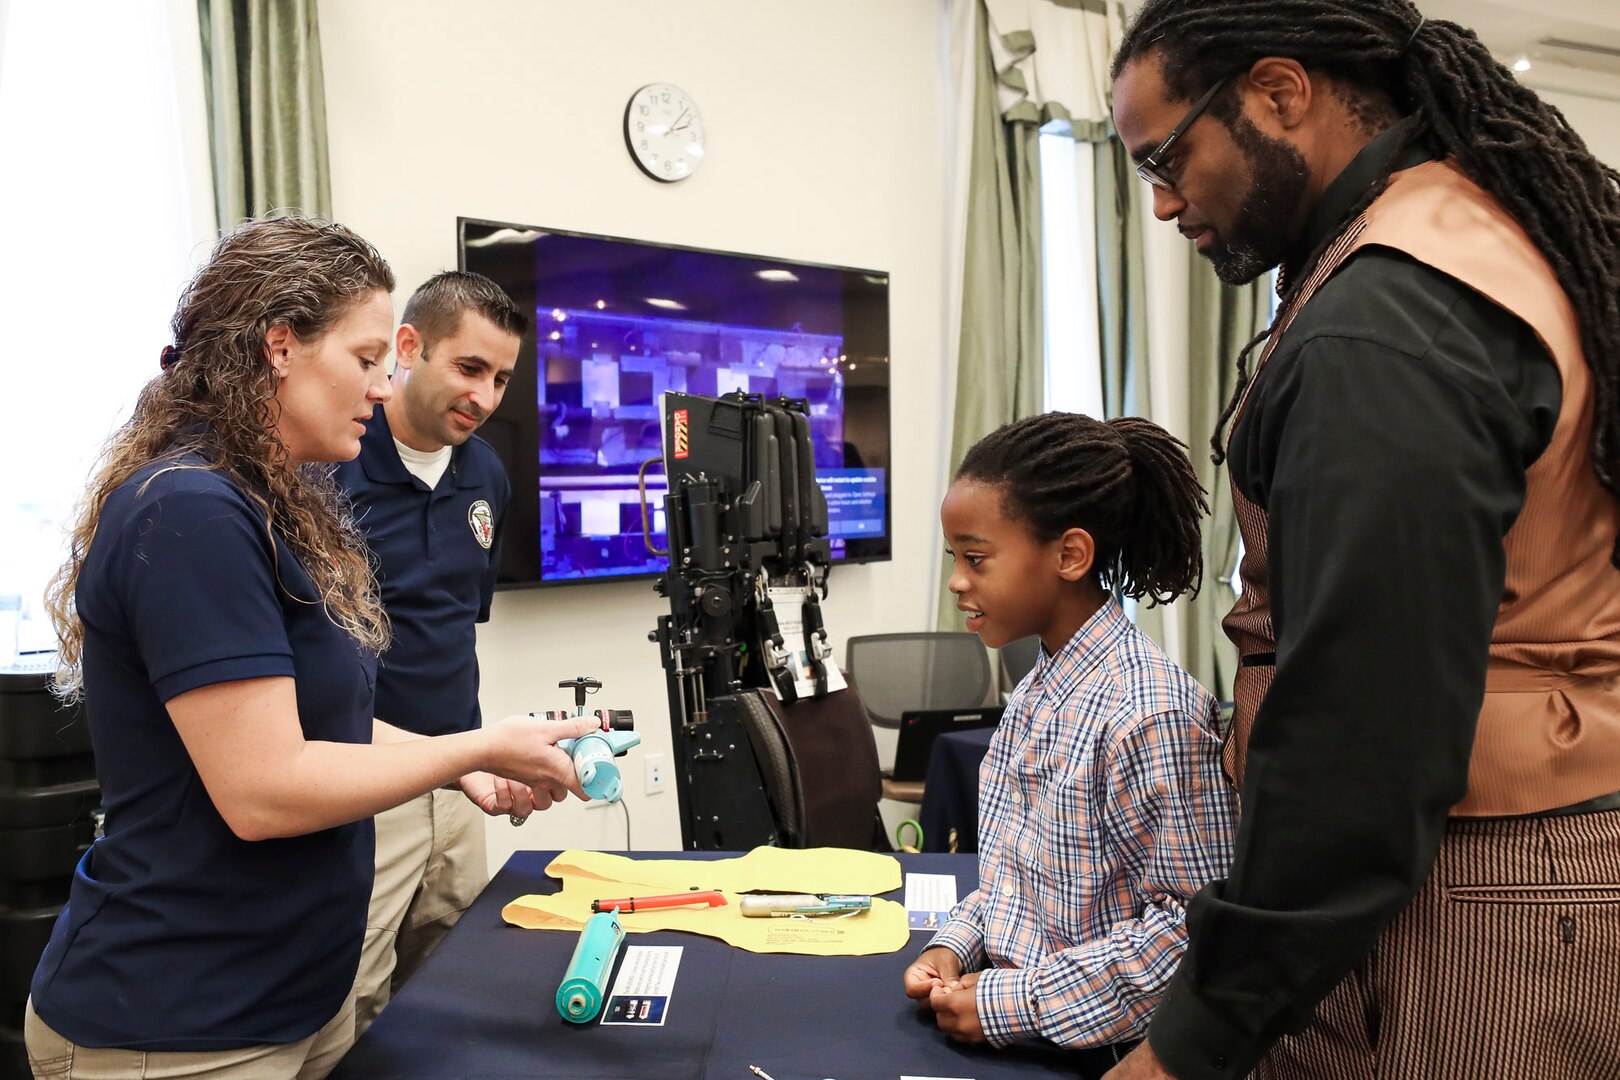 NSWC IHEODTD Acquisition Management Specialist Jessica Schombs and NSWC IHEODTD Equipment Specialist Nick Schombs of the CAD/PAD Division explain the components of an ejection seat to Antwan Proctor and his eight-year-old son Antwan Proctor, Jr. at the STEM Fest event held at Waldorf West Public Library, Oct. 26.